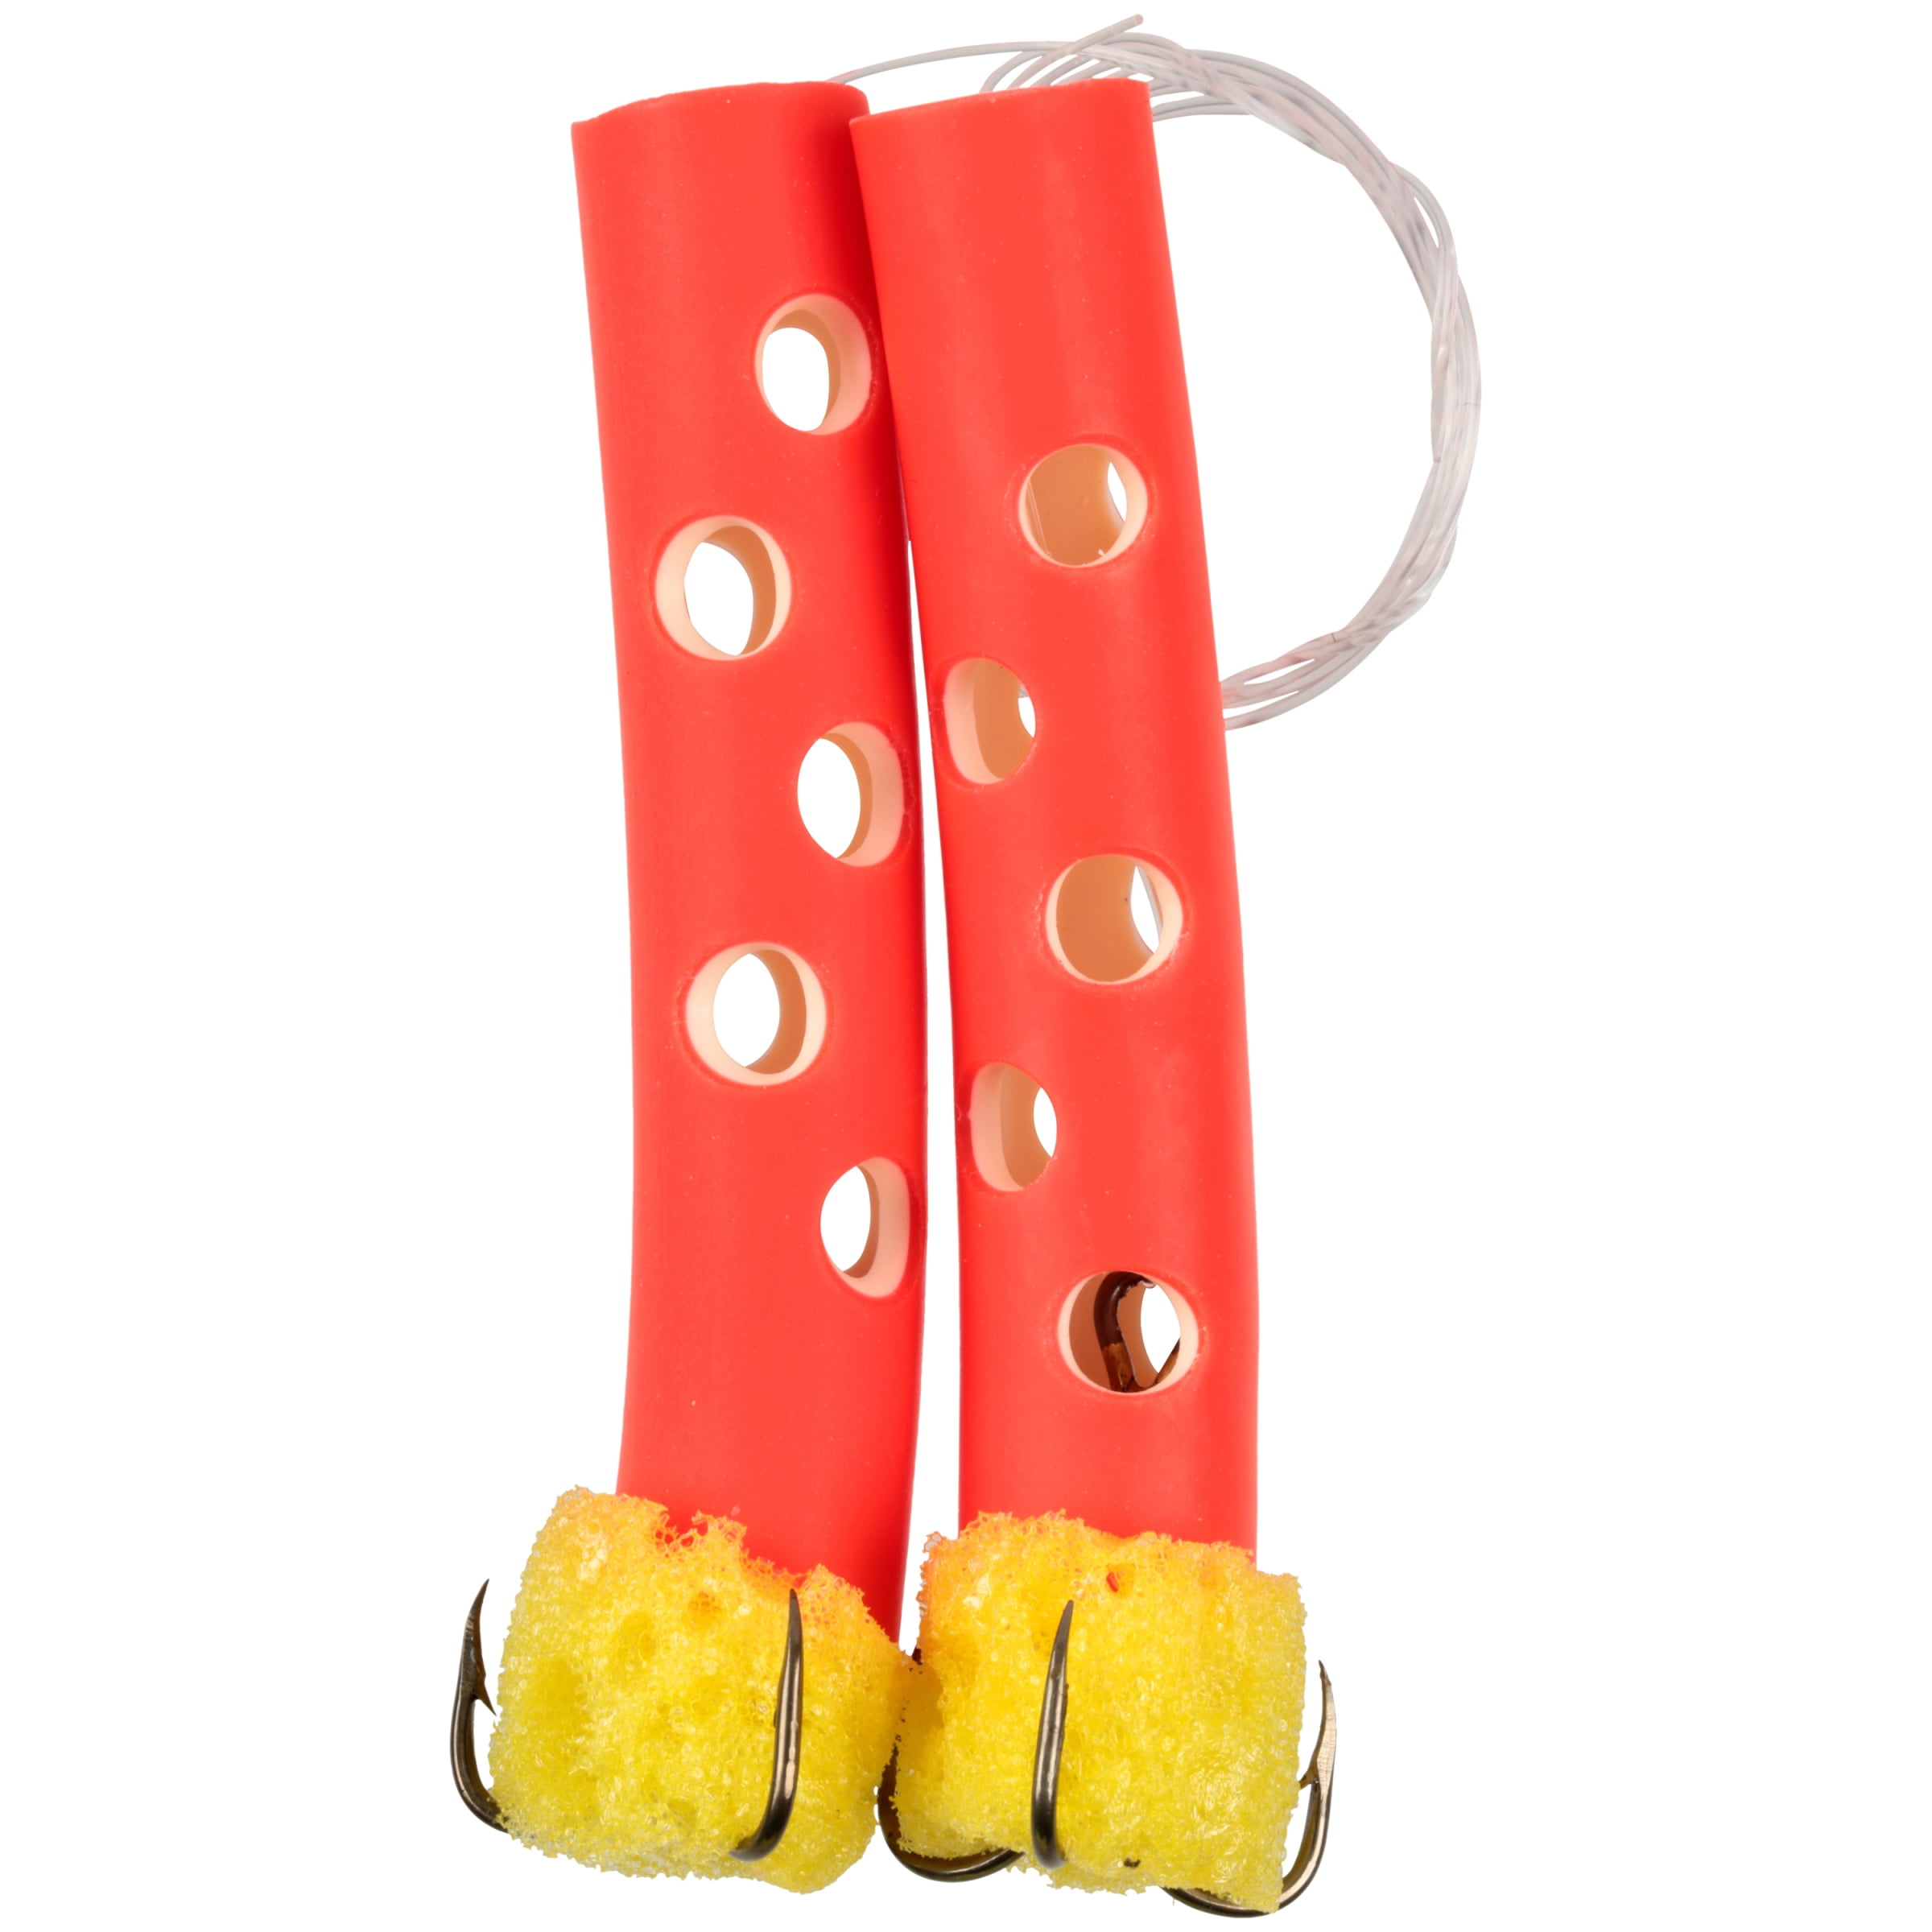 Magic Bait Hog Wild Tube Holder Two Pack 2 Yellow 3 Red Catfish Stink for sale online 